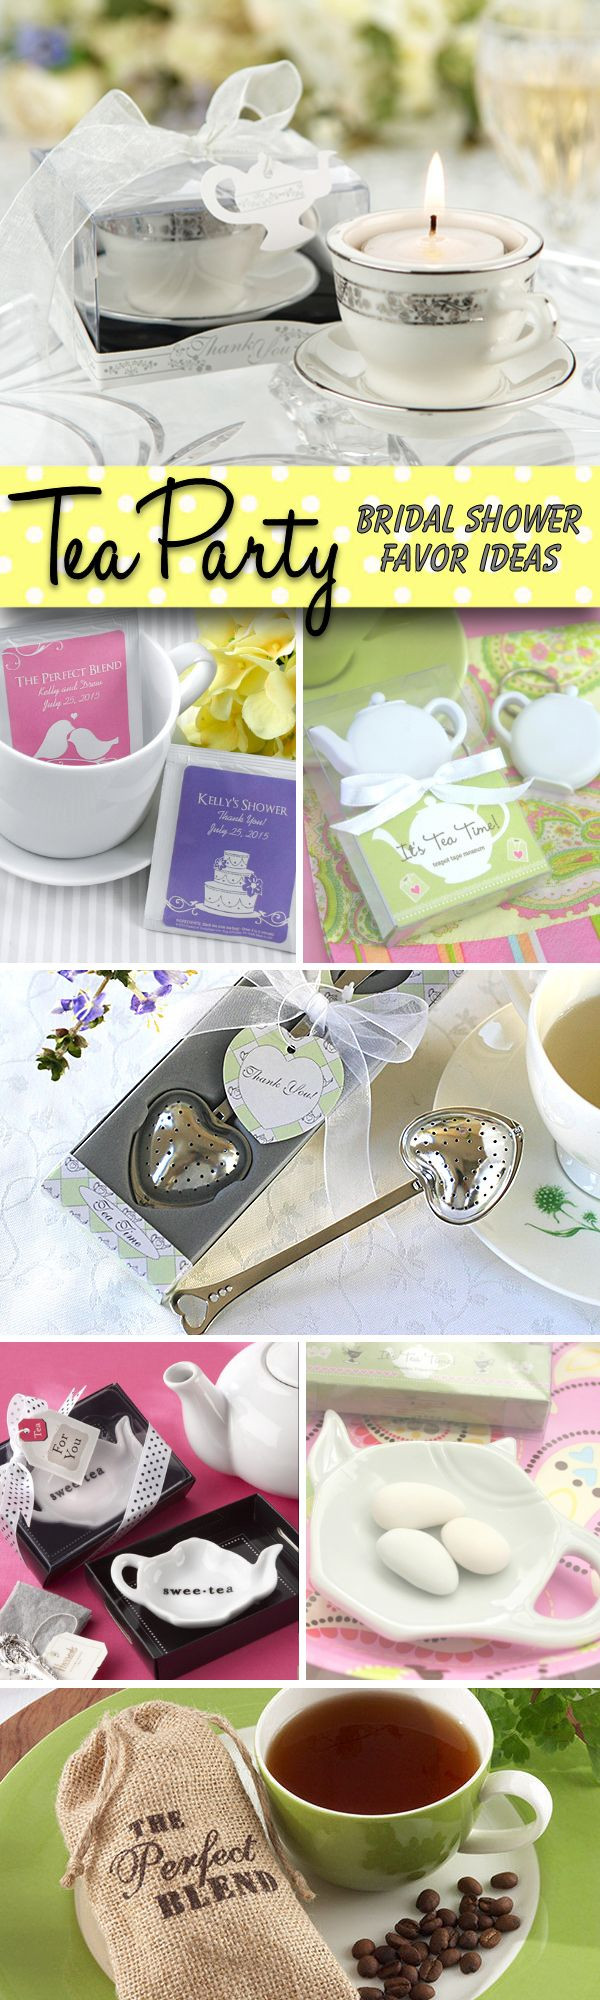 Tea Party Favor Ideas For Adults
 335 best Tea Party Ideas For Adults images on Pinterest